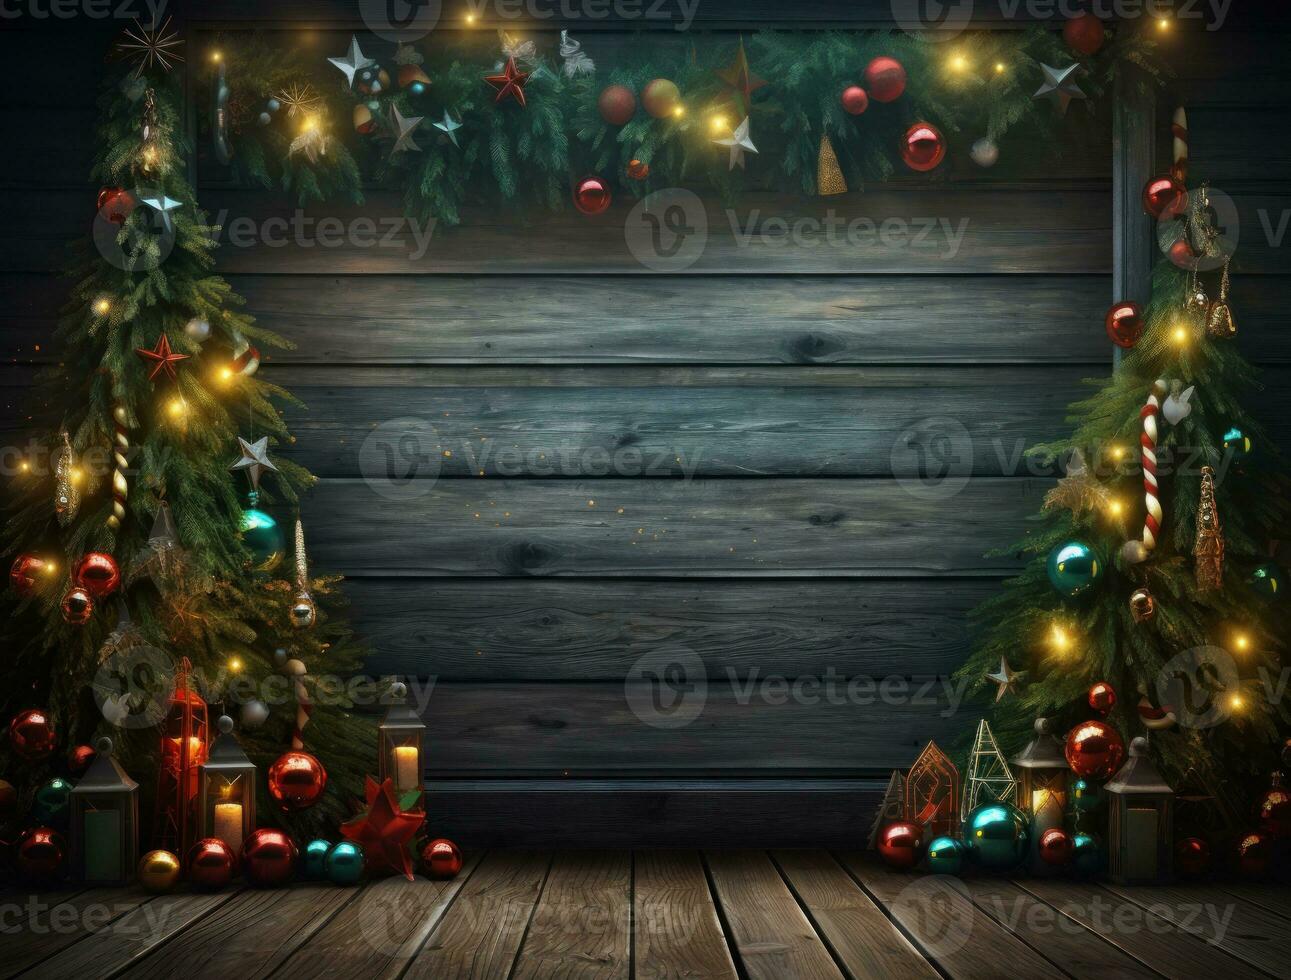 Wooden Christmas background with lights photo